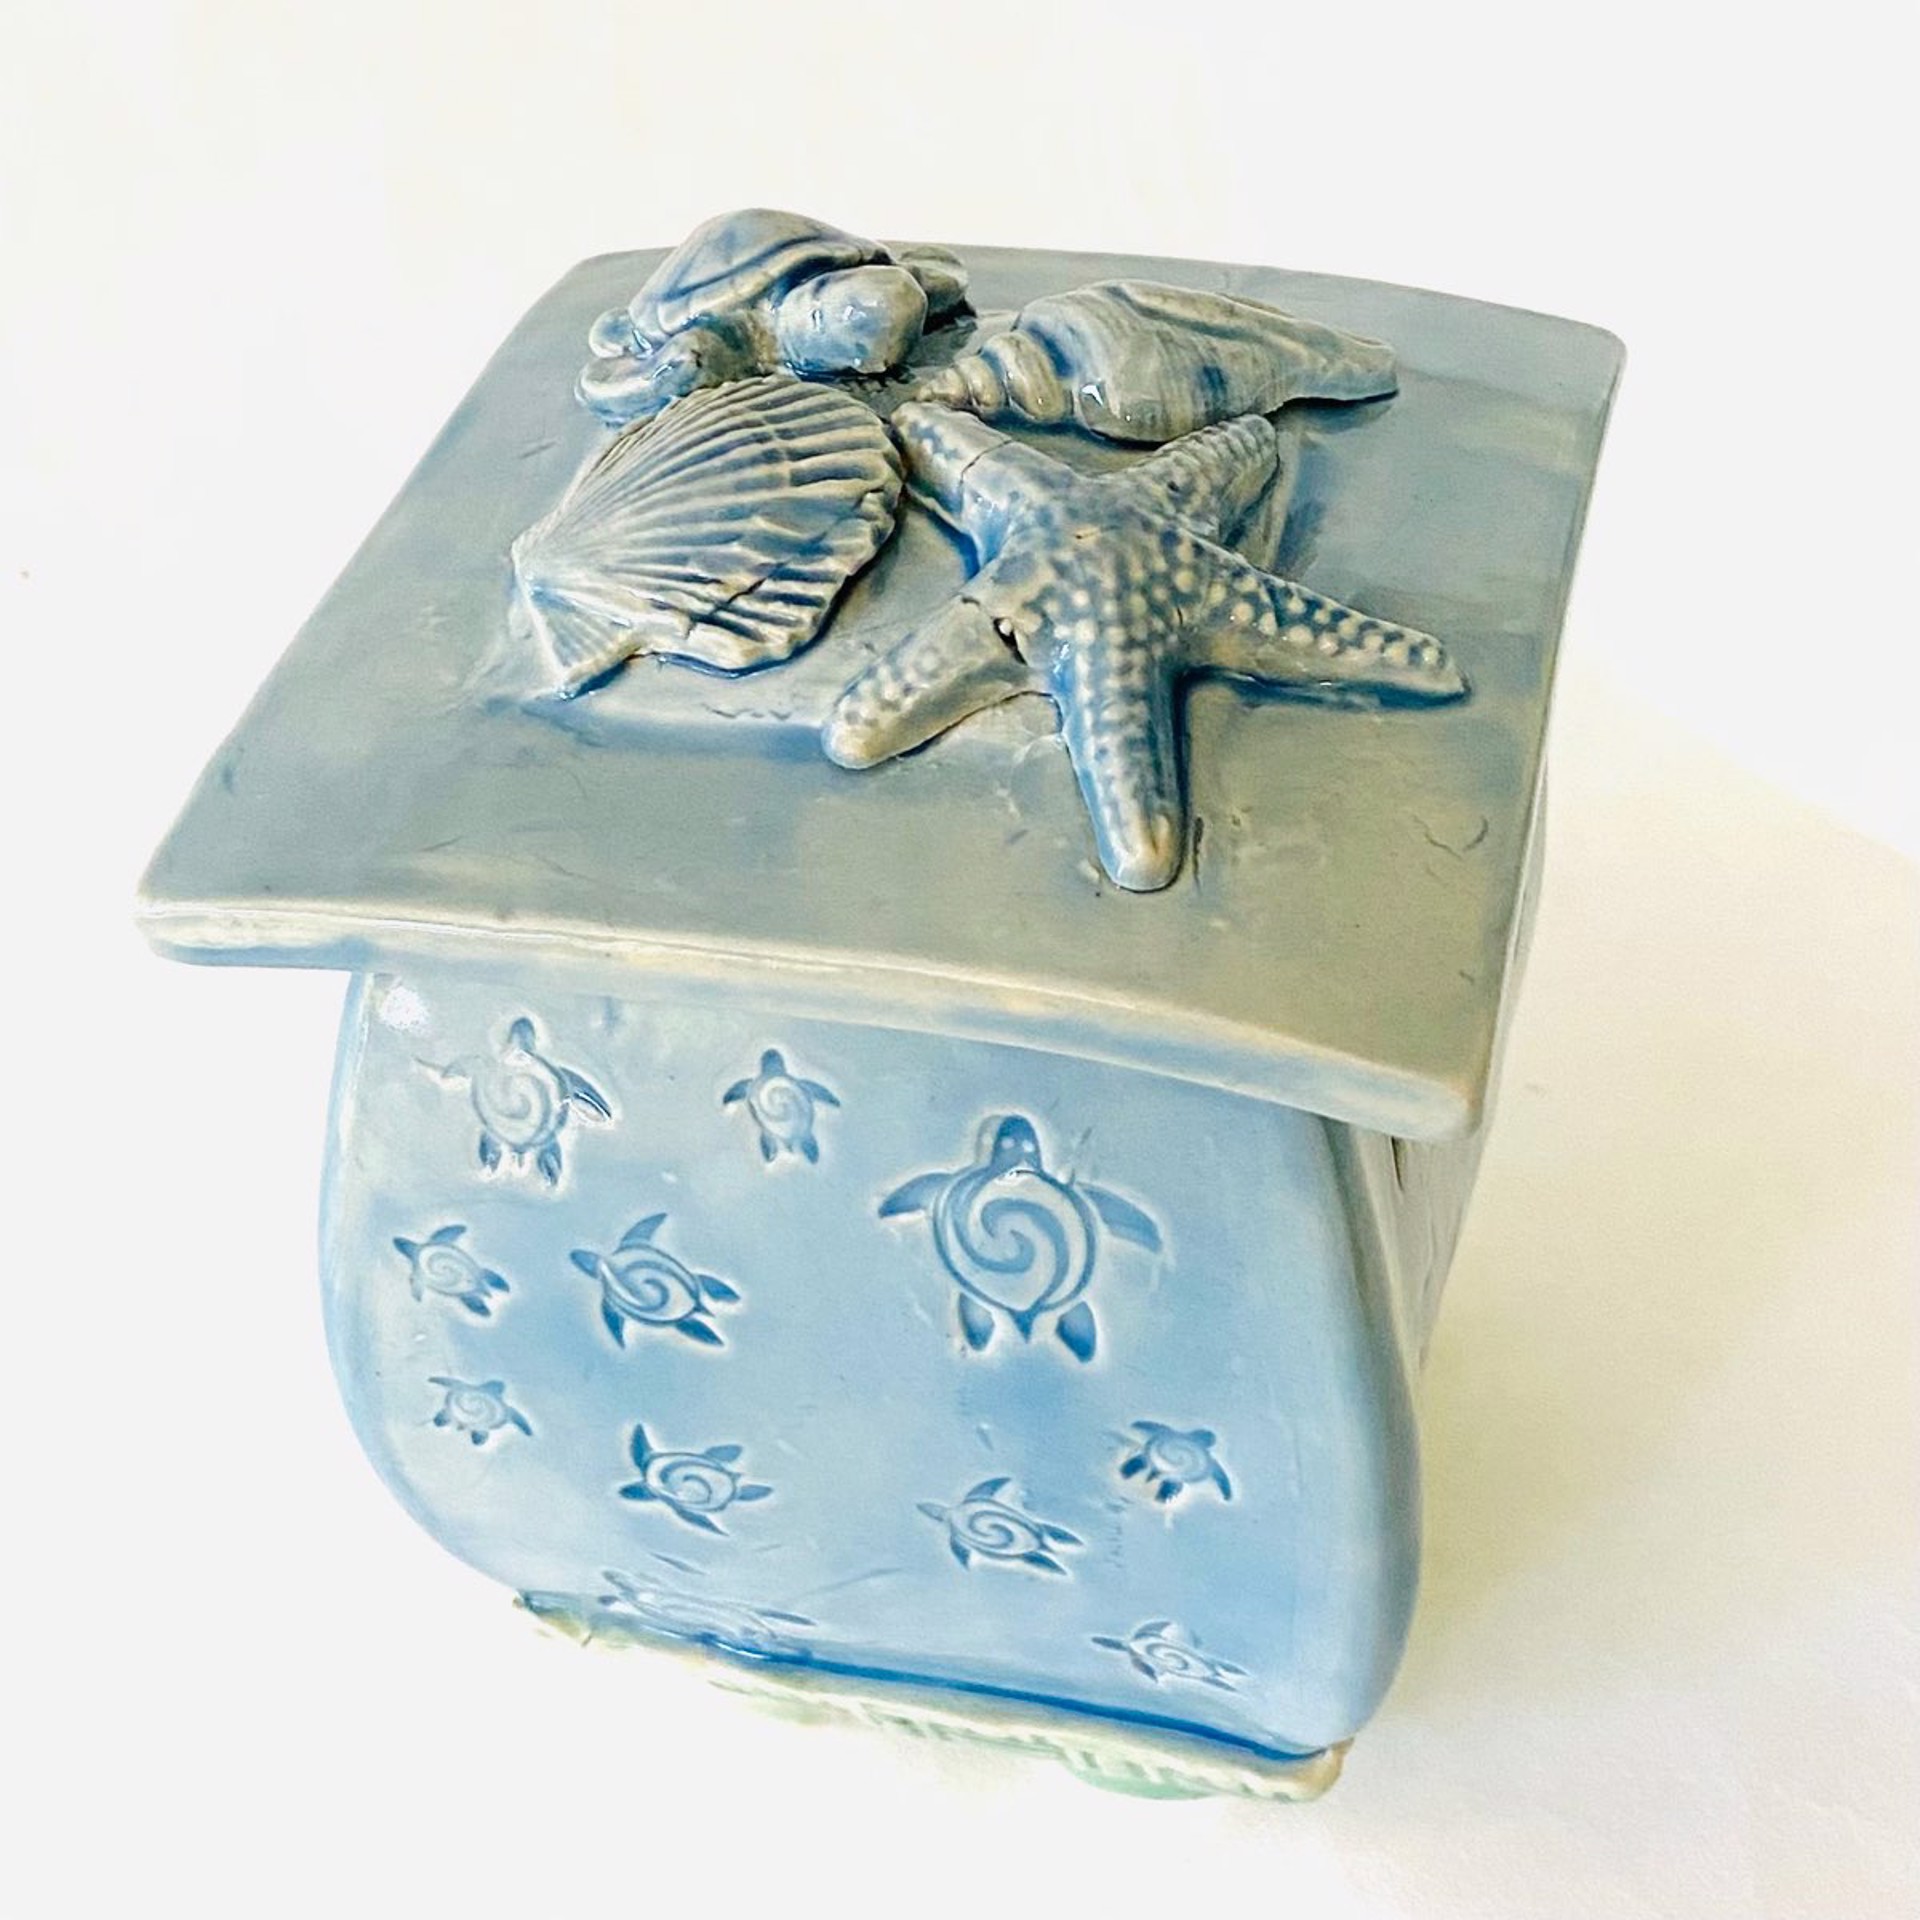 Sea Shell Turtle Embossed Lidded Canister by Barbara Bergwerf, Ceramics